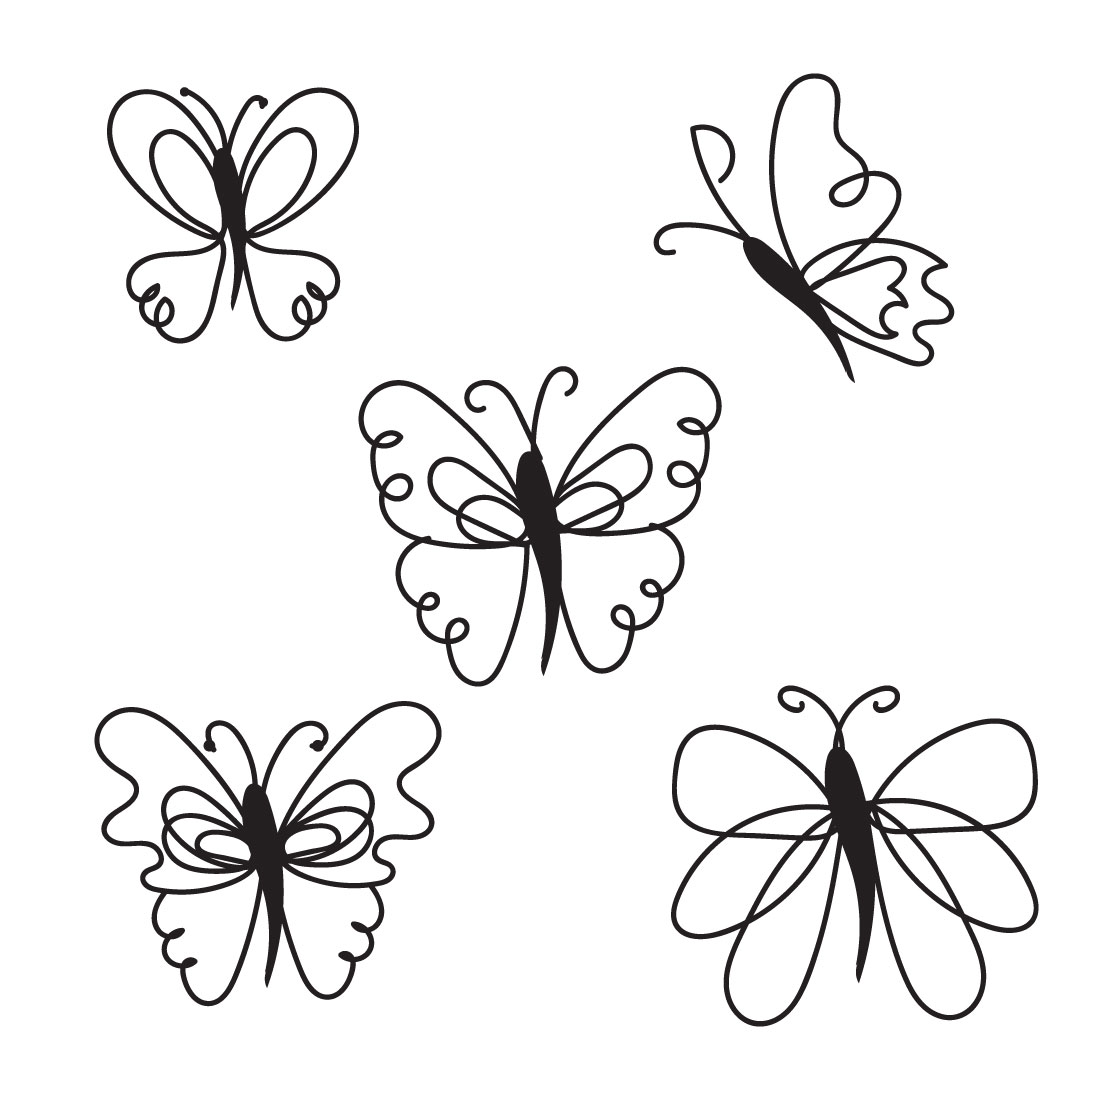 Four black and white butterflies on a white background.